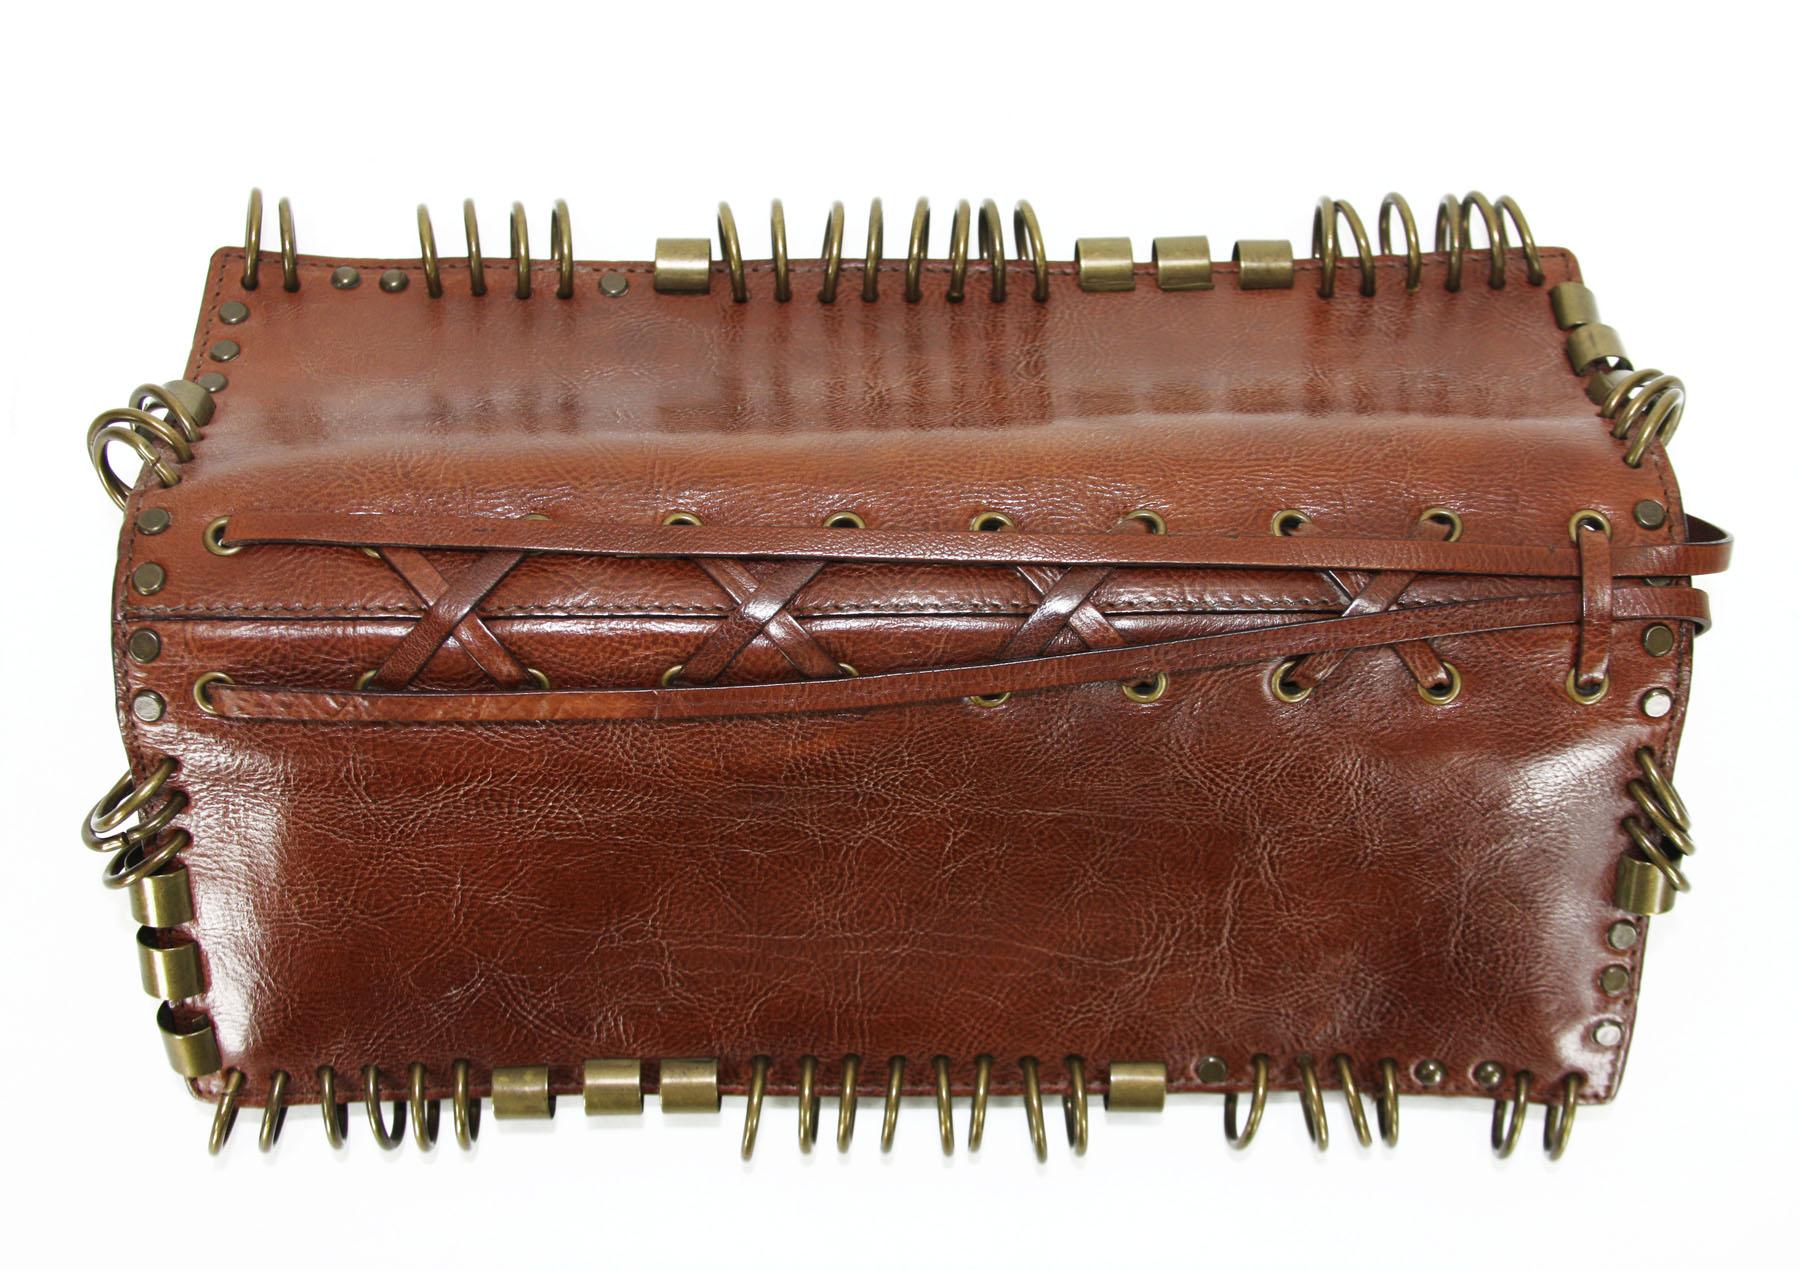 Very rare ring-studded leather clutch designed by Tom Ford for Yves Saint Laurent Rive Gauche.
Spring/Summer 2002 Ready-to-Wear Collection.
Cognac color.
Measurements: L - 10.5 inches, H - 4 inches.
N 95927-001998
Long leather strings to wrap around